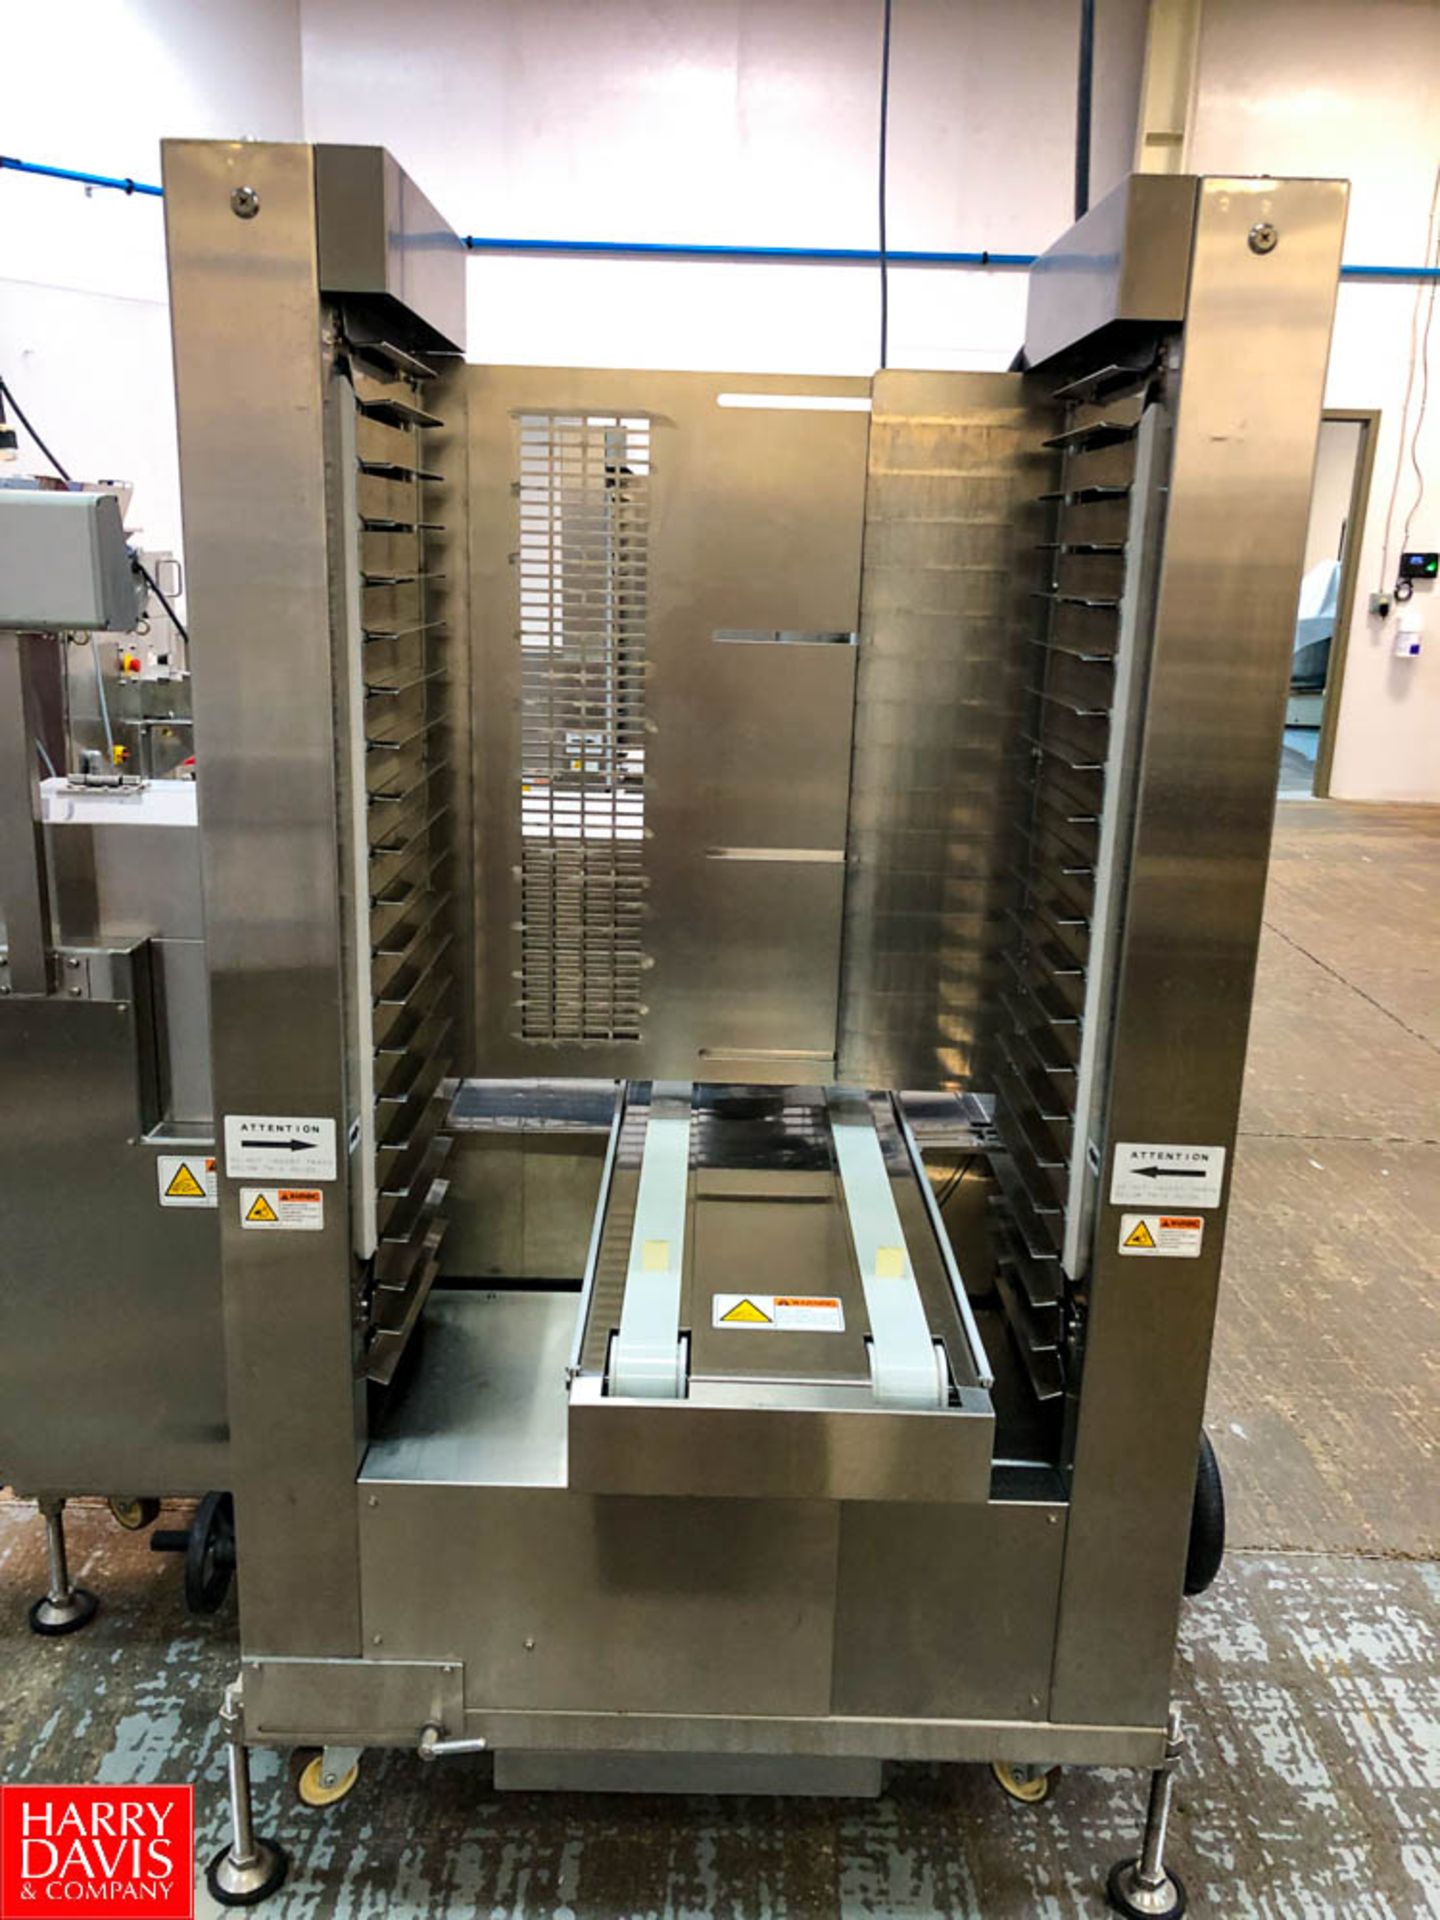 2019 Rheon Set Panner KP302; Tray Size: 660 mm, Up to 60 pcs/min, S/N: 00233 With Belting Rigging - Image 5 of 5